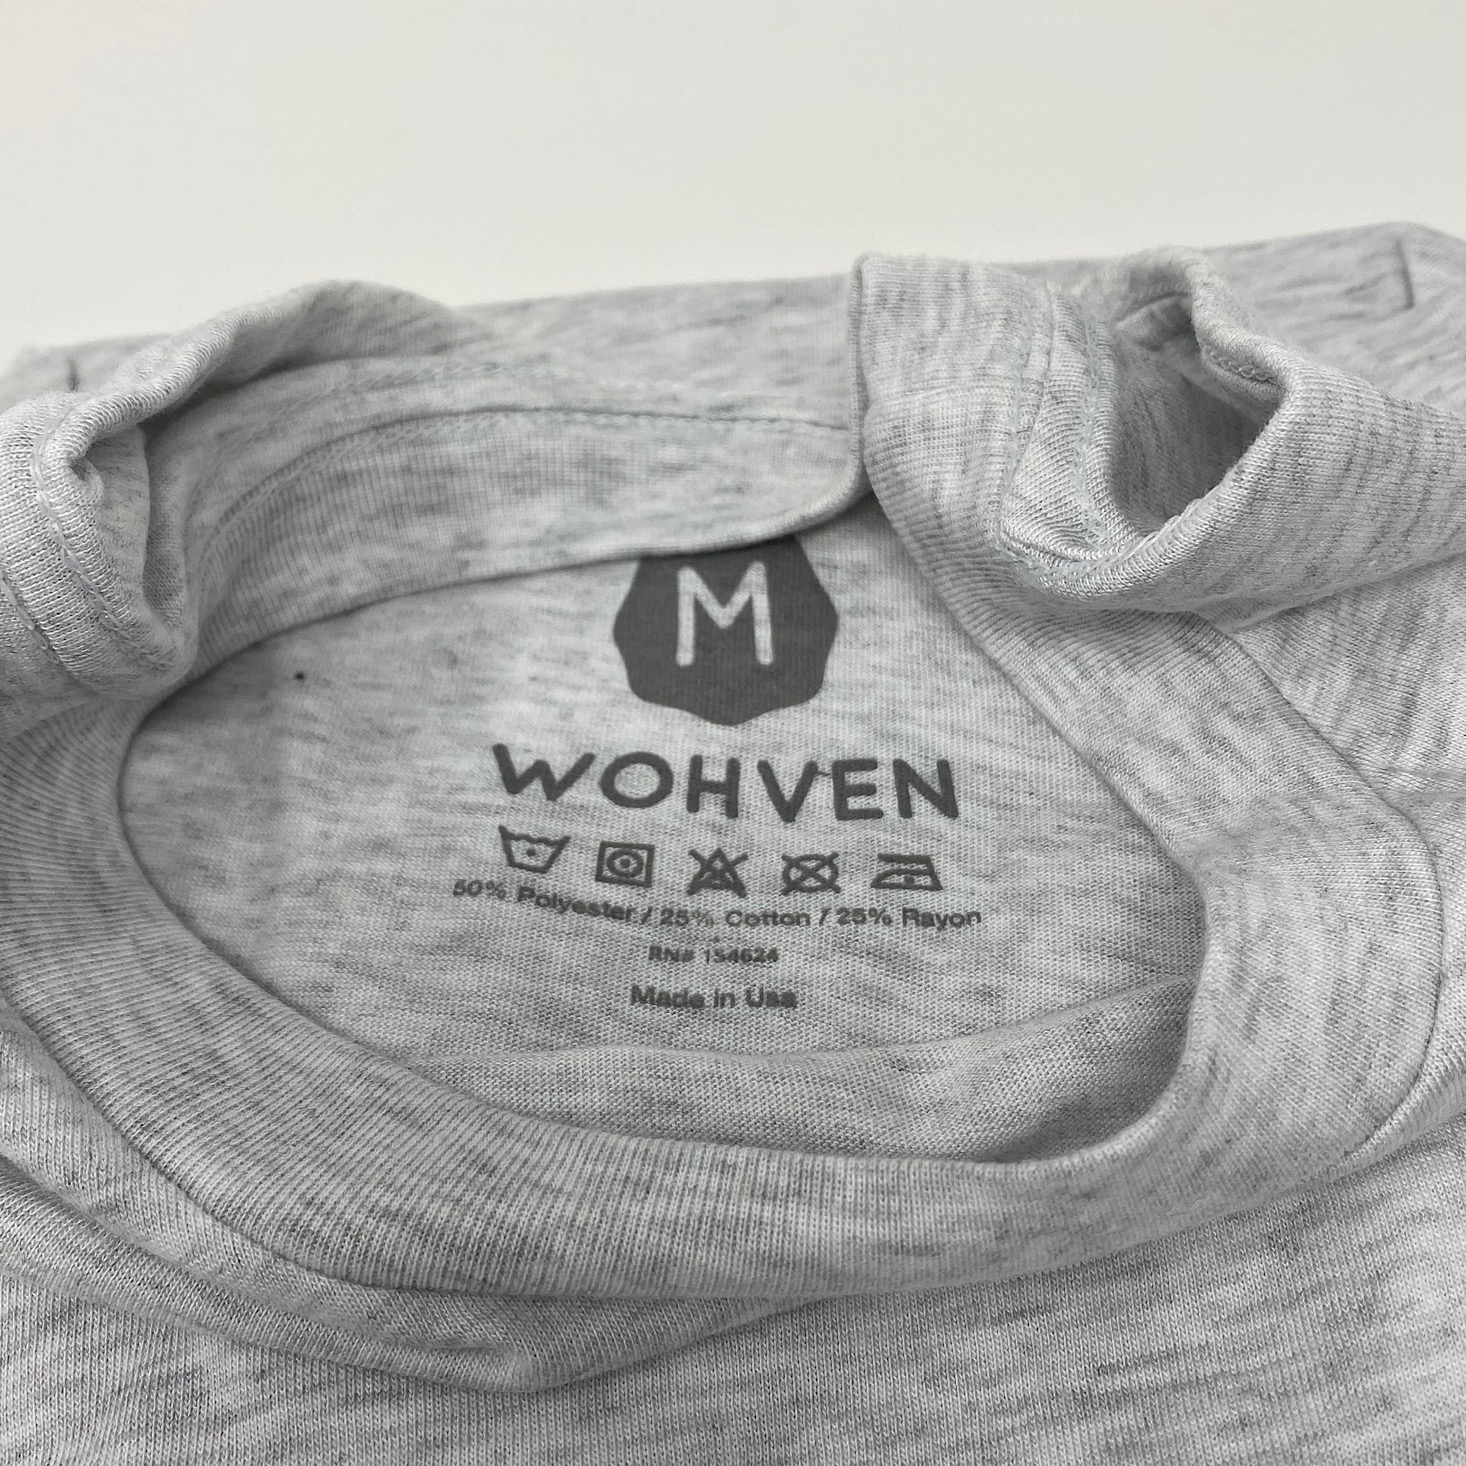 Wohven Subscription Review + Coupon - May 2020 | MSA